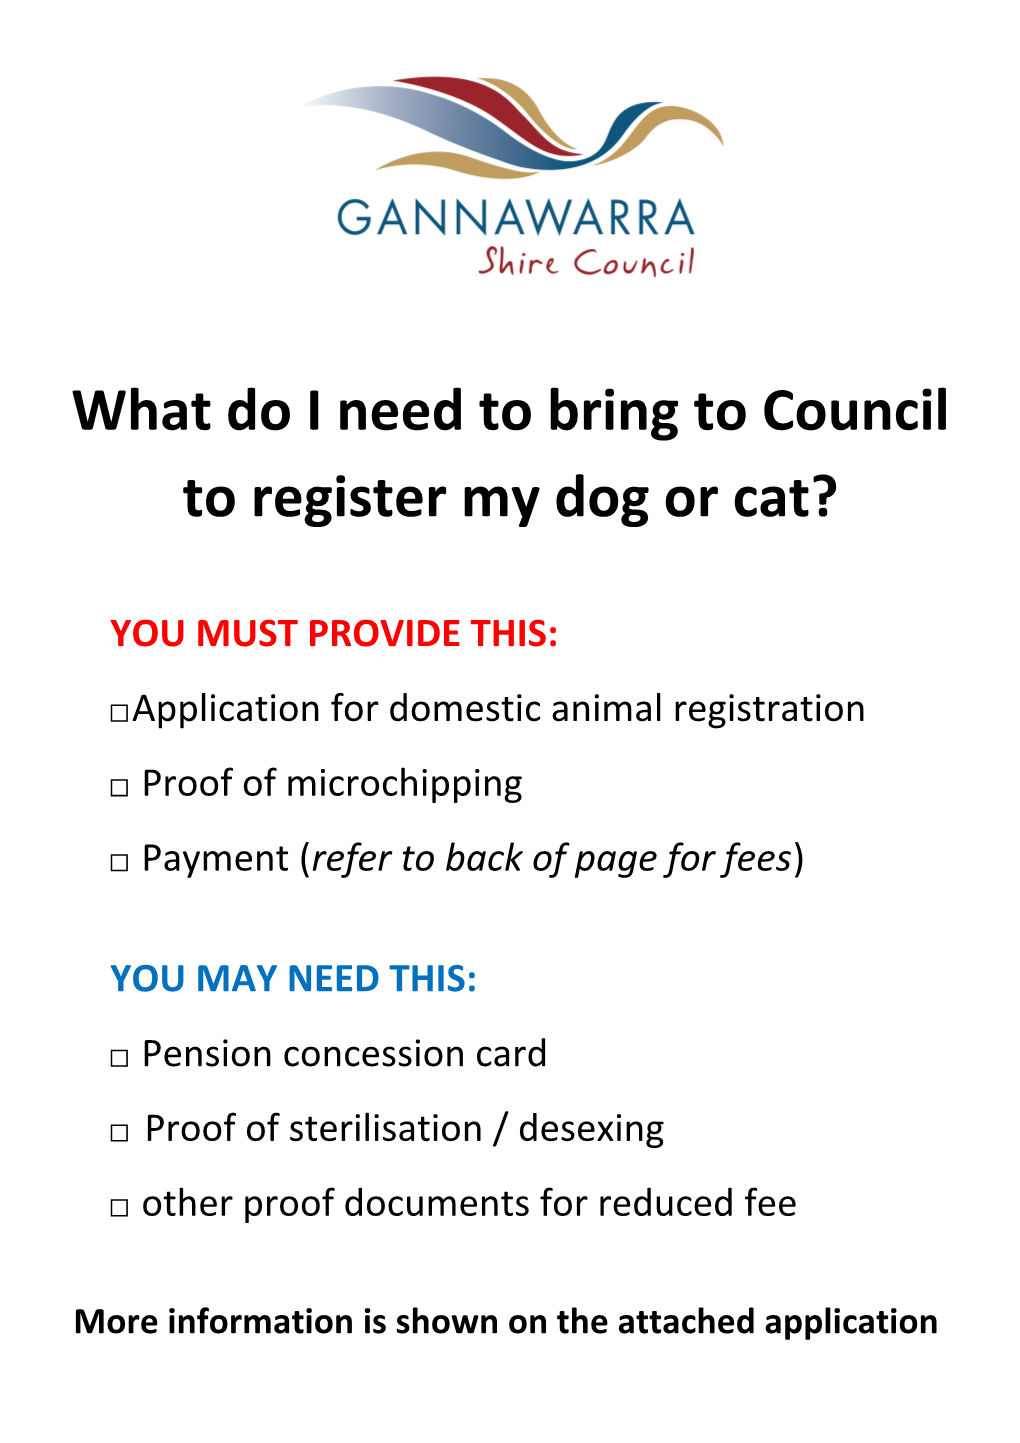 What Do I Need to Bring to Council to Register My Dog Or Cat?